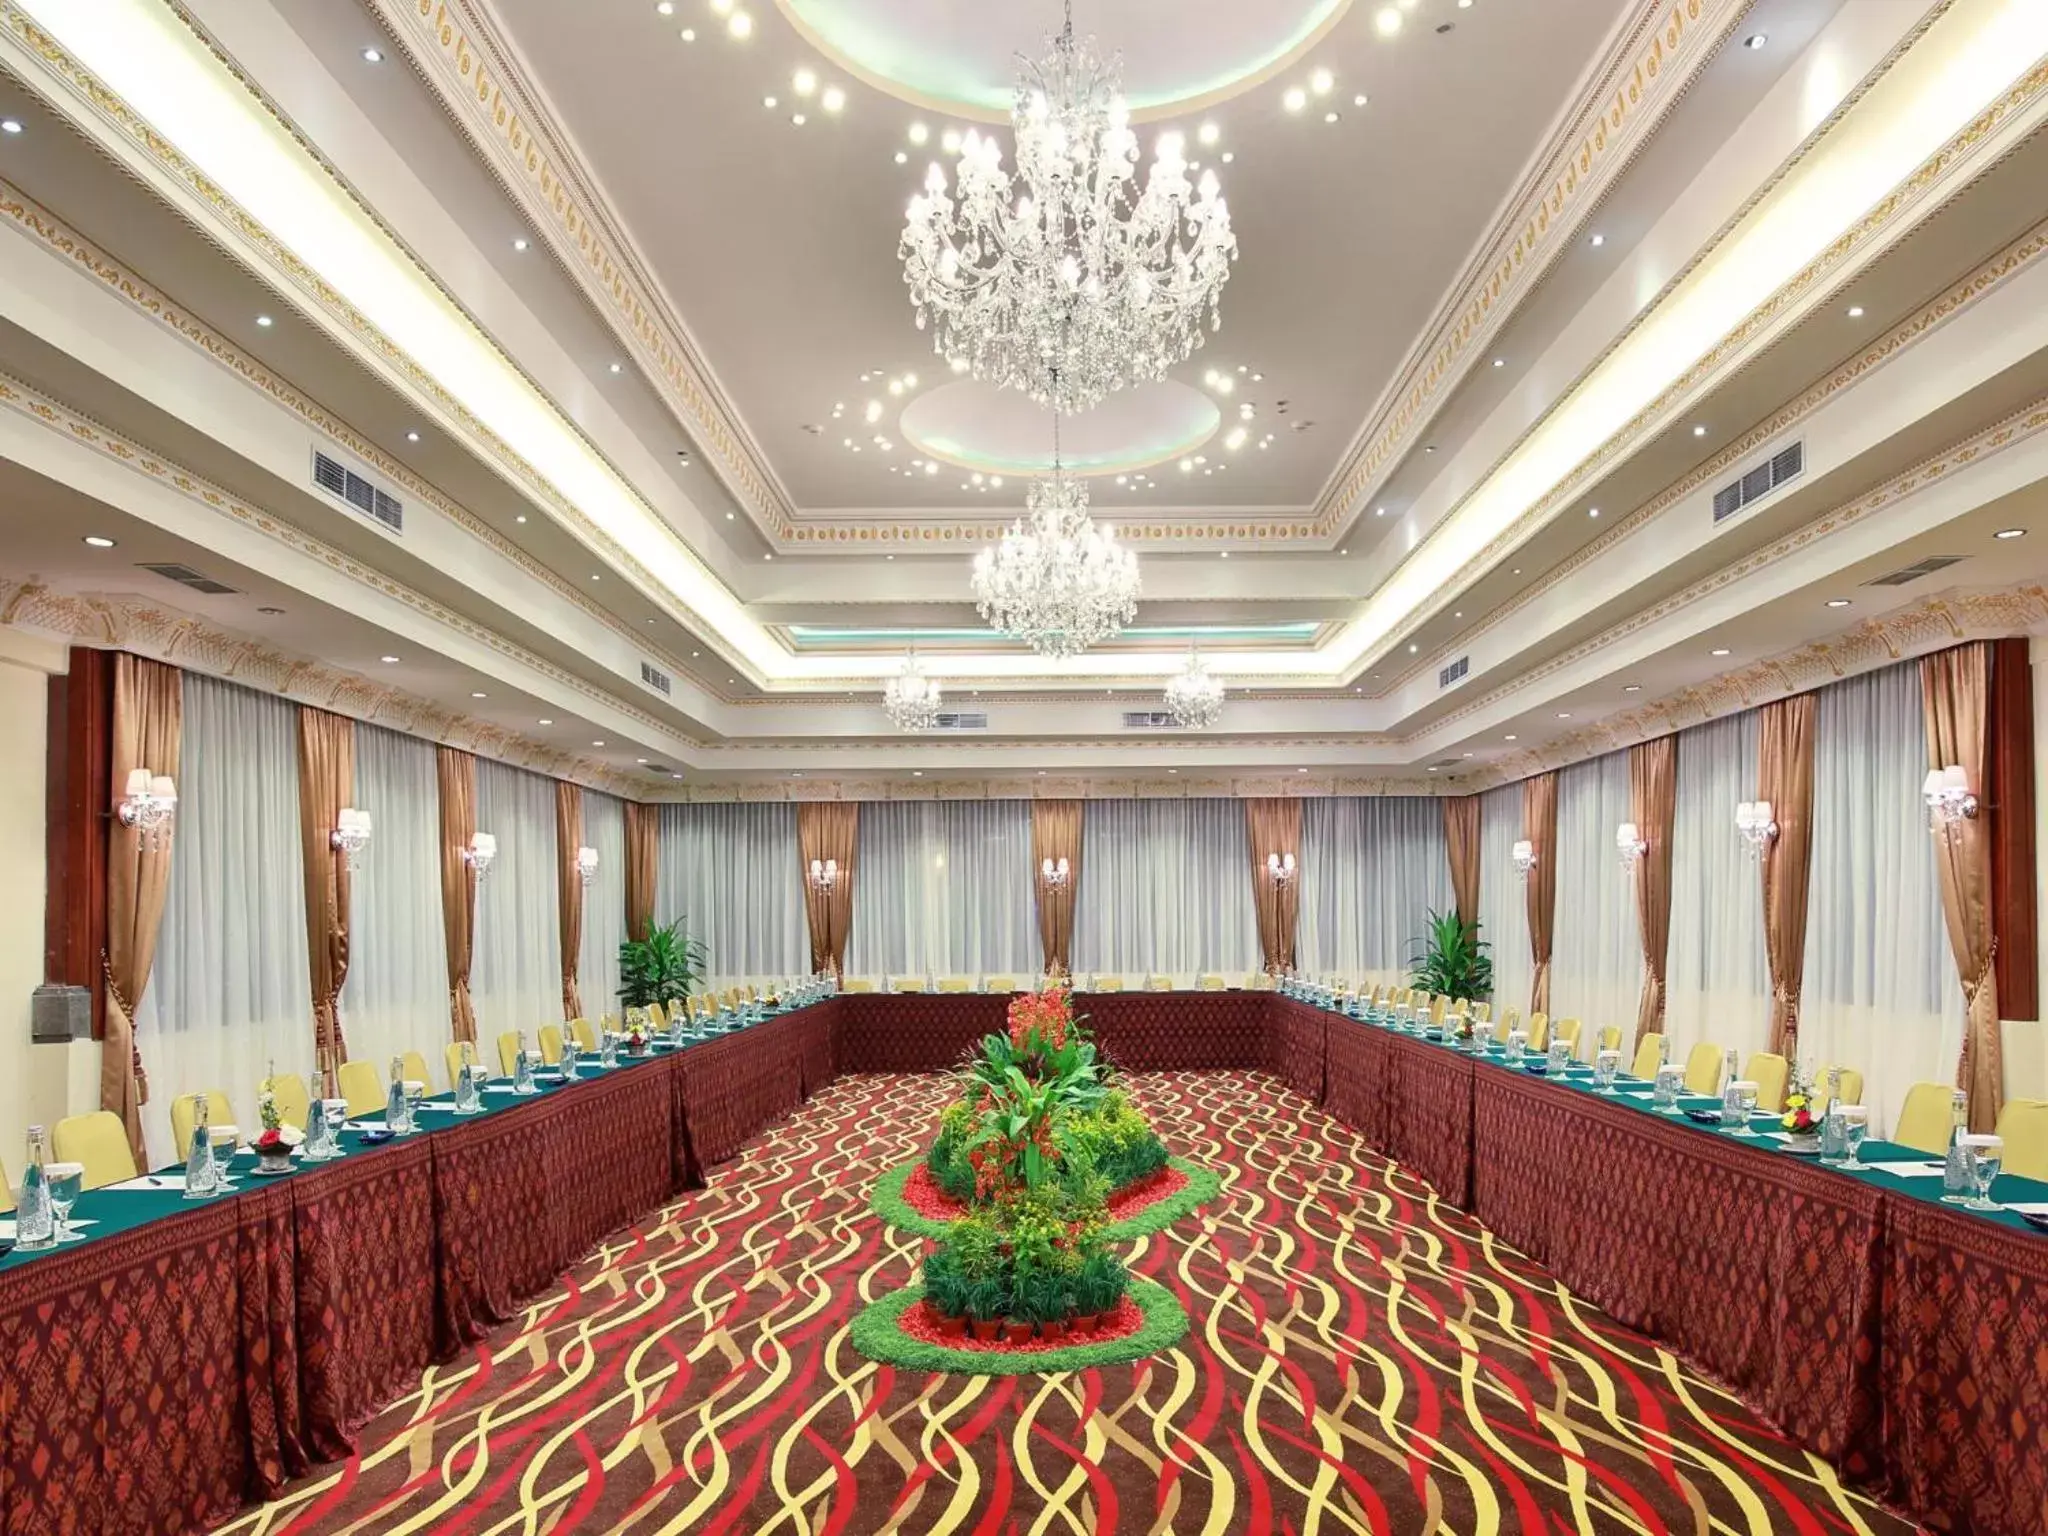 Meeting/conference room, Banquet Facilities in The Grand Bali Nusa Dua